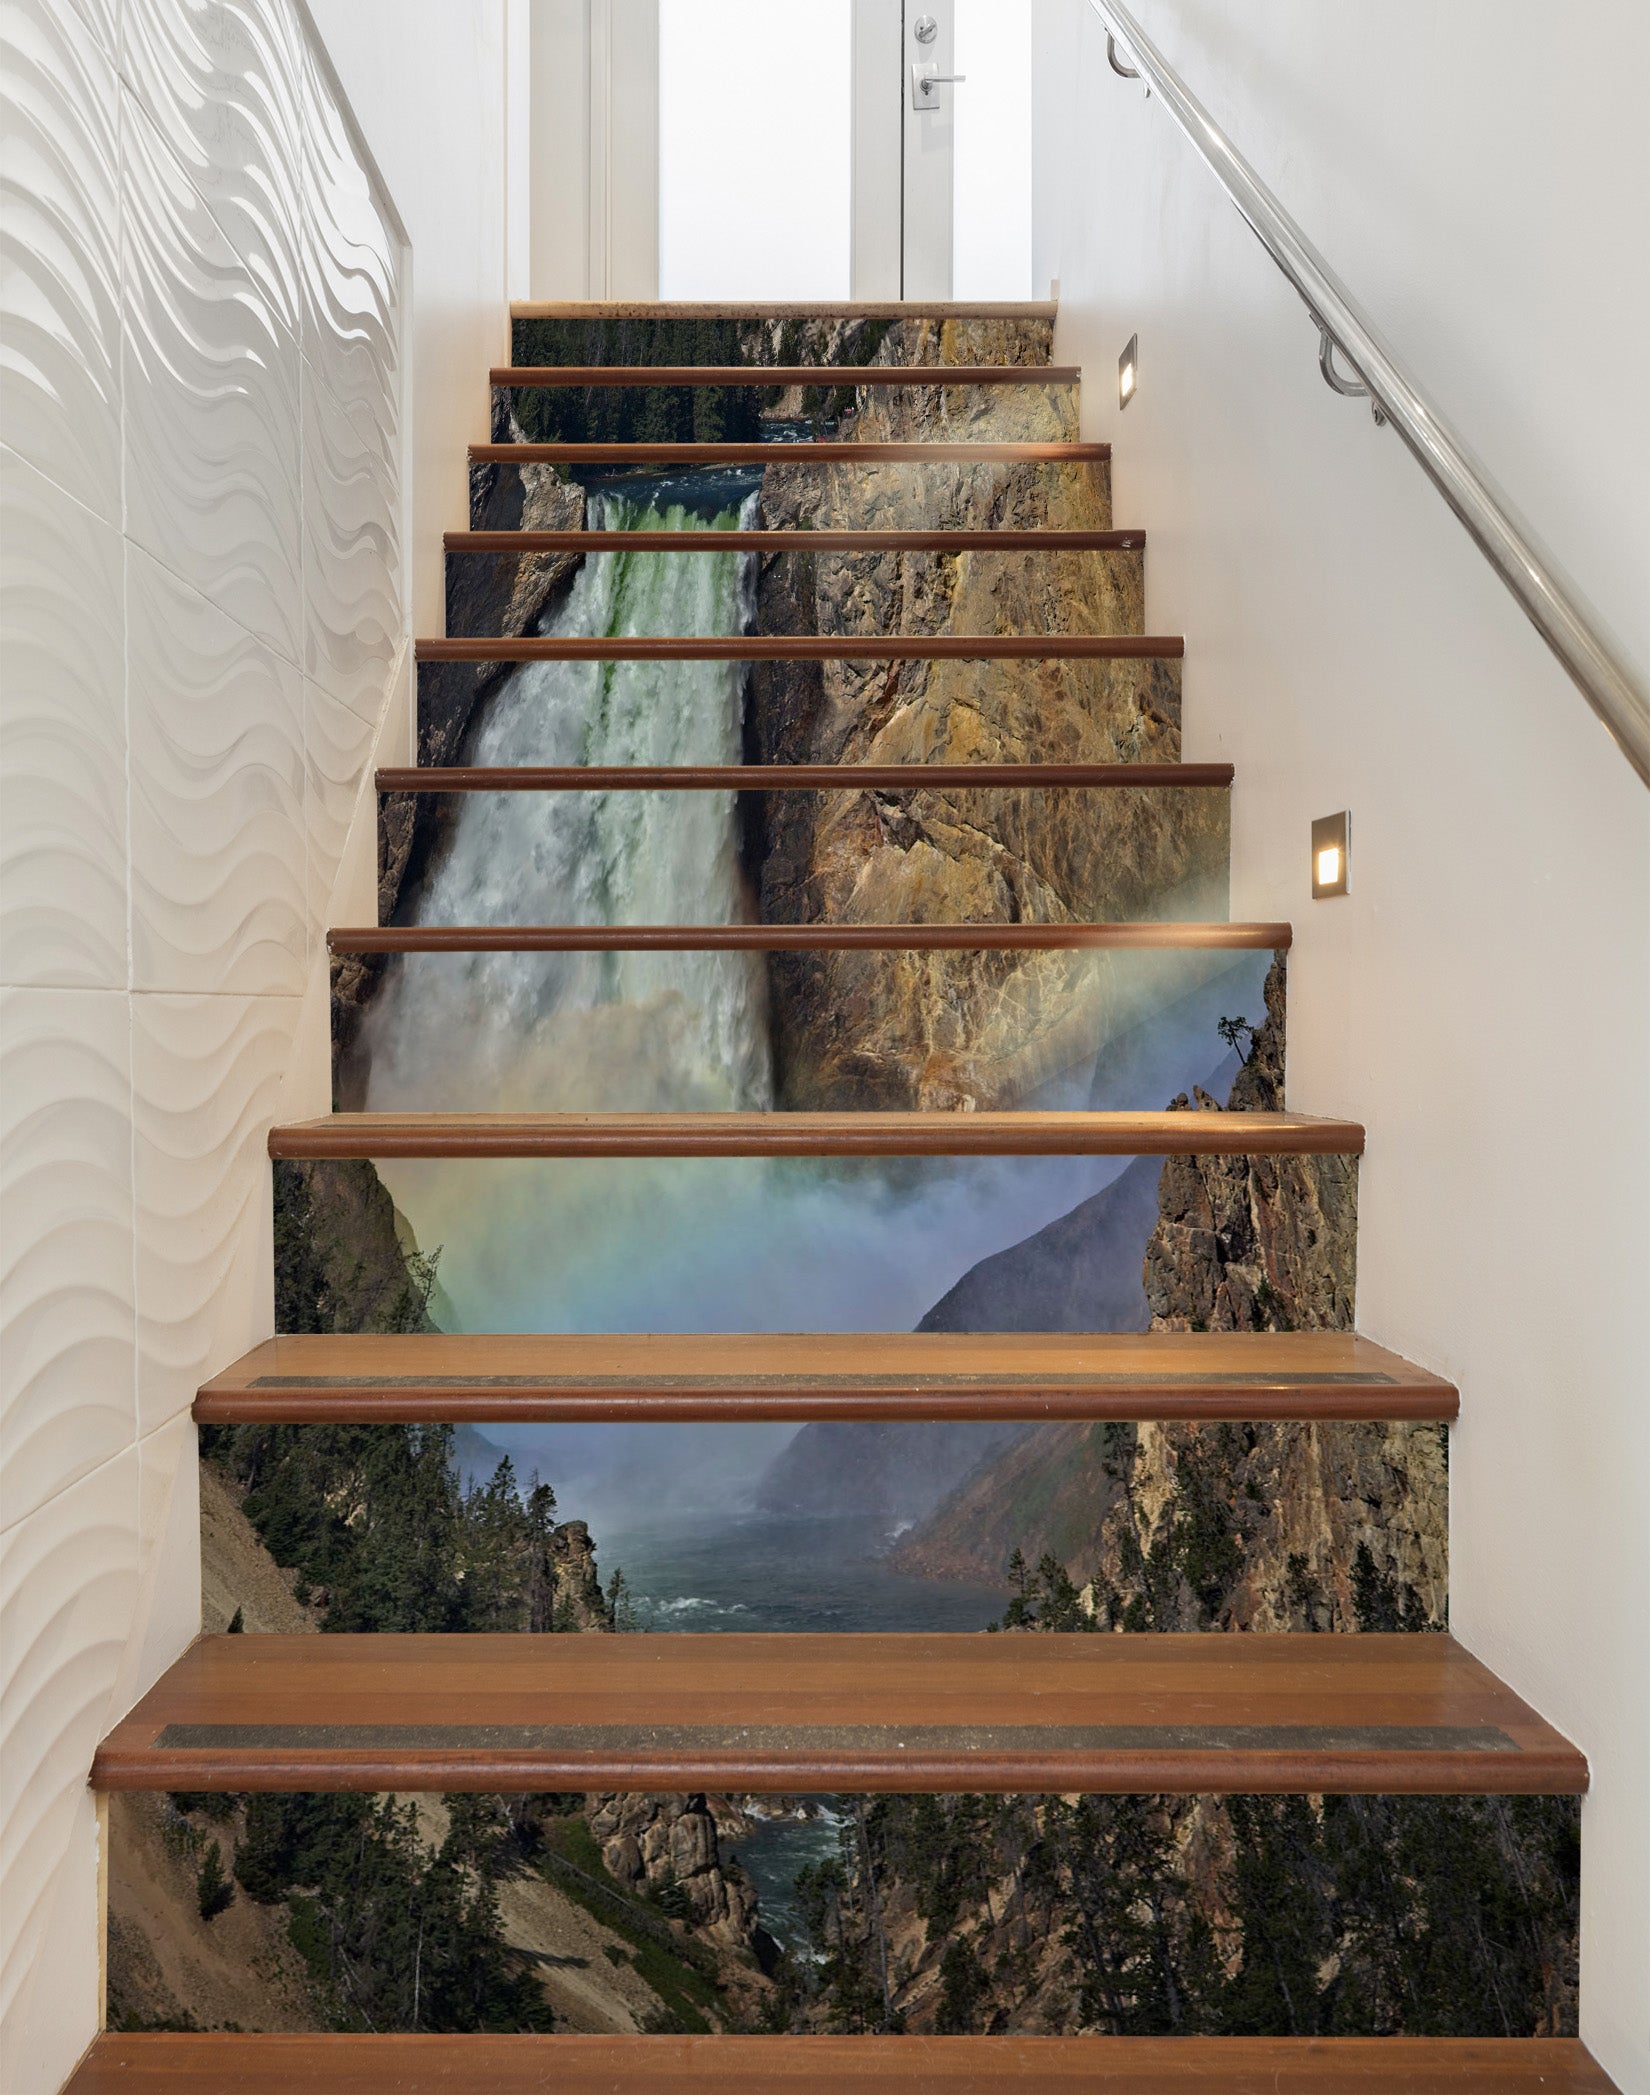 3D Mountain 9901 Kathy Barefield Stair Risers